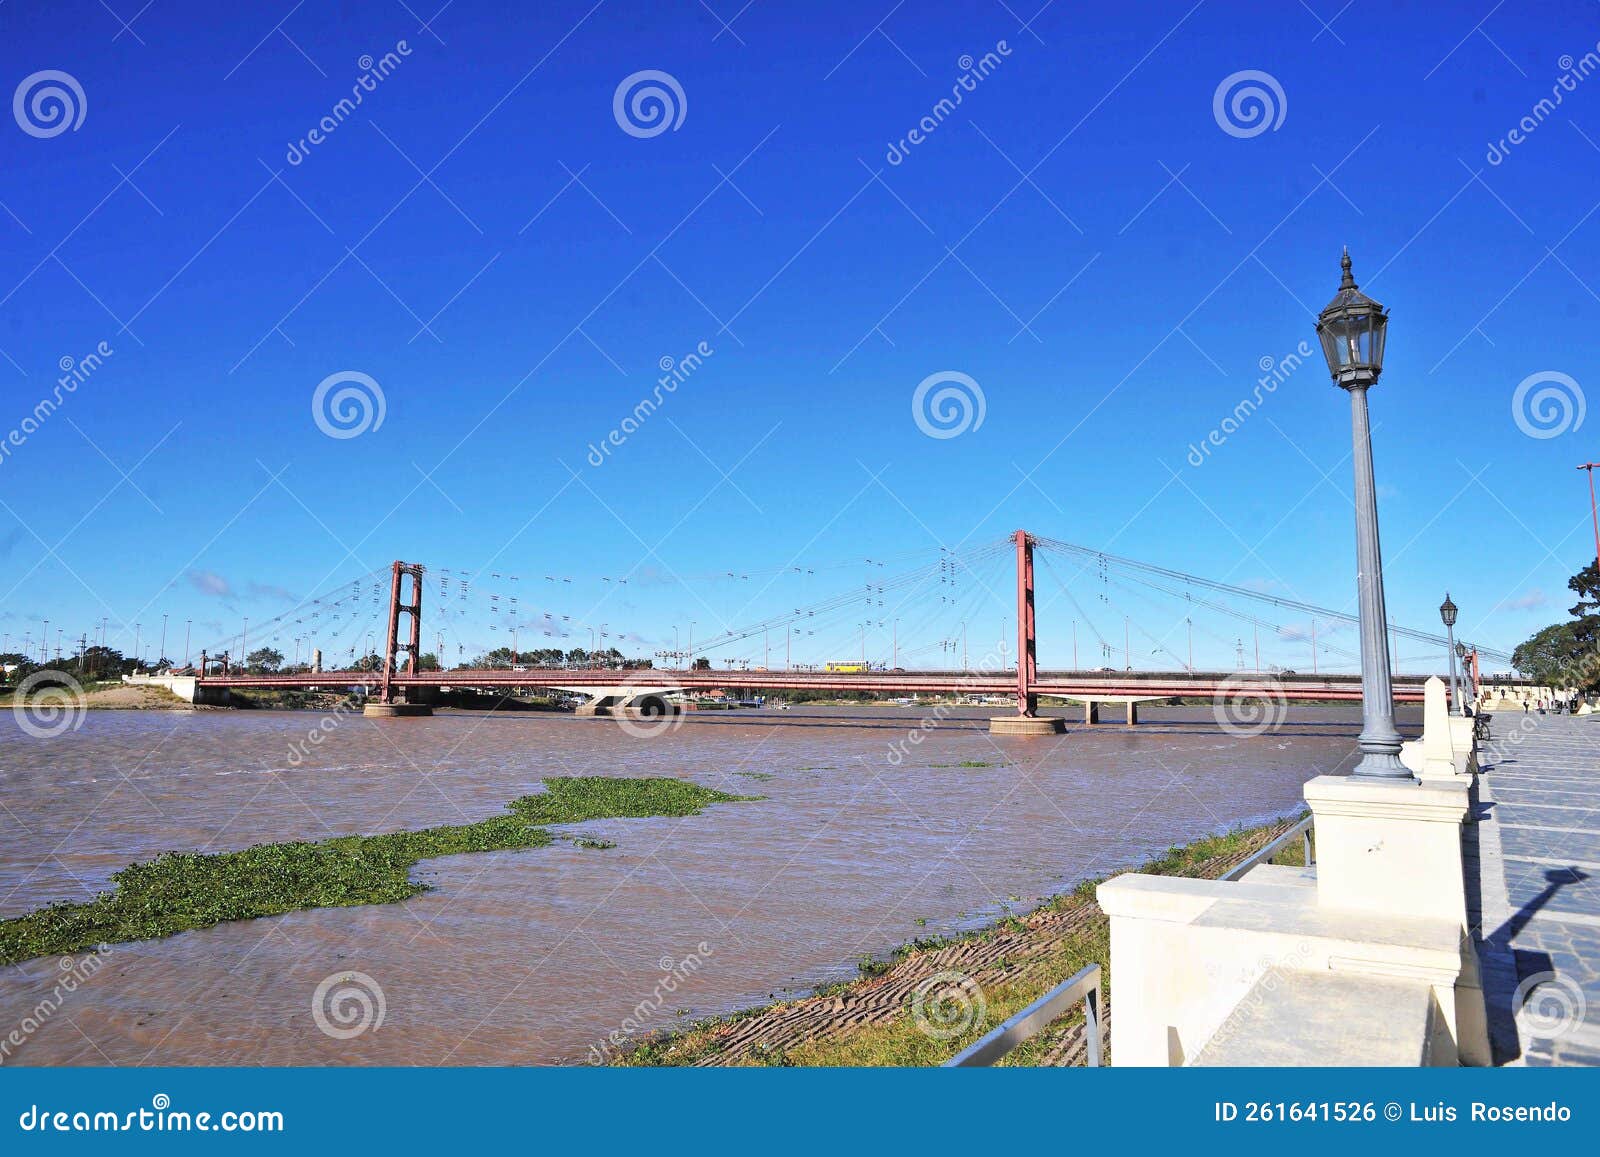 marcial candioti bridge, better known as the santa fe hanging bridge, is a suspension bridge located in the city of